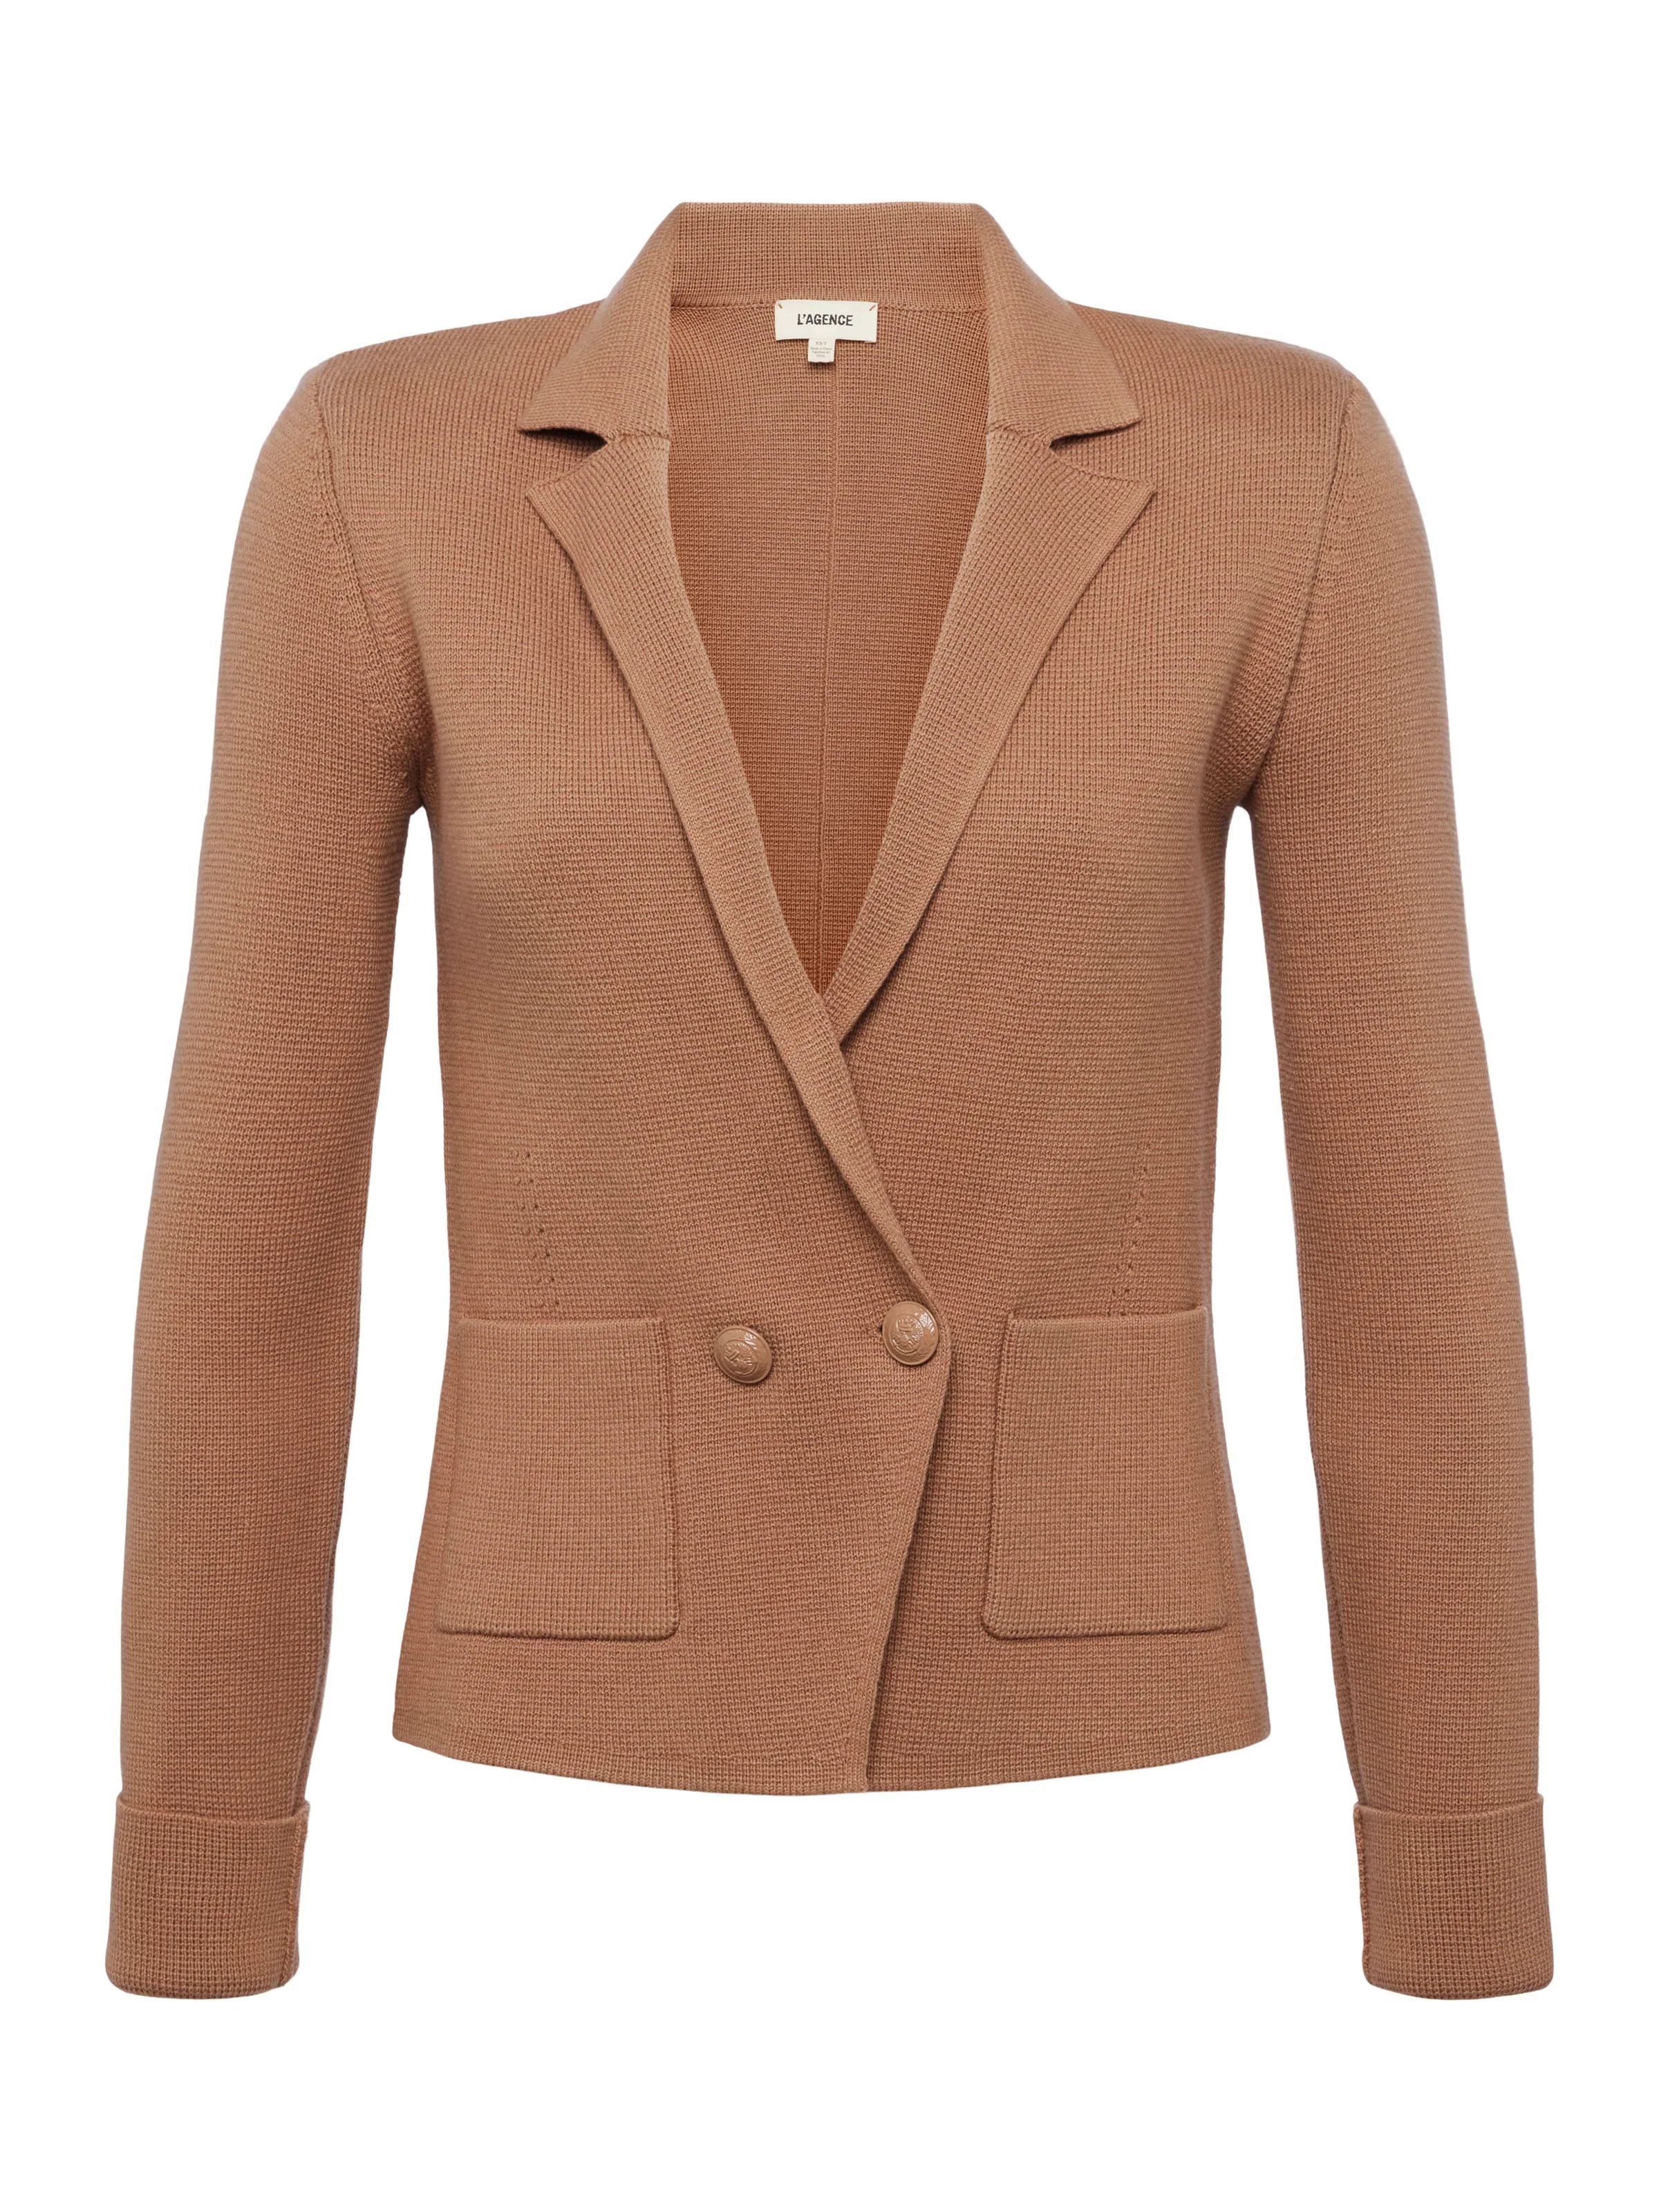 L'AGENCE Sofia Knit Blazer in Ginger Snap | L'Agence